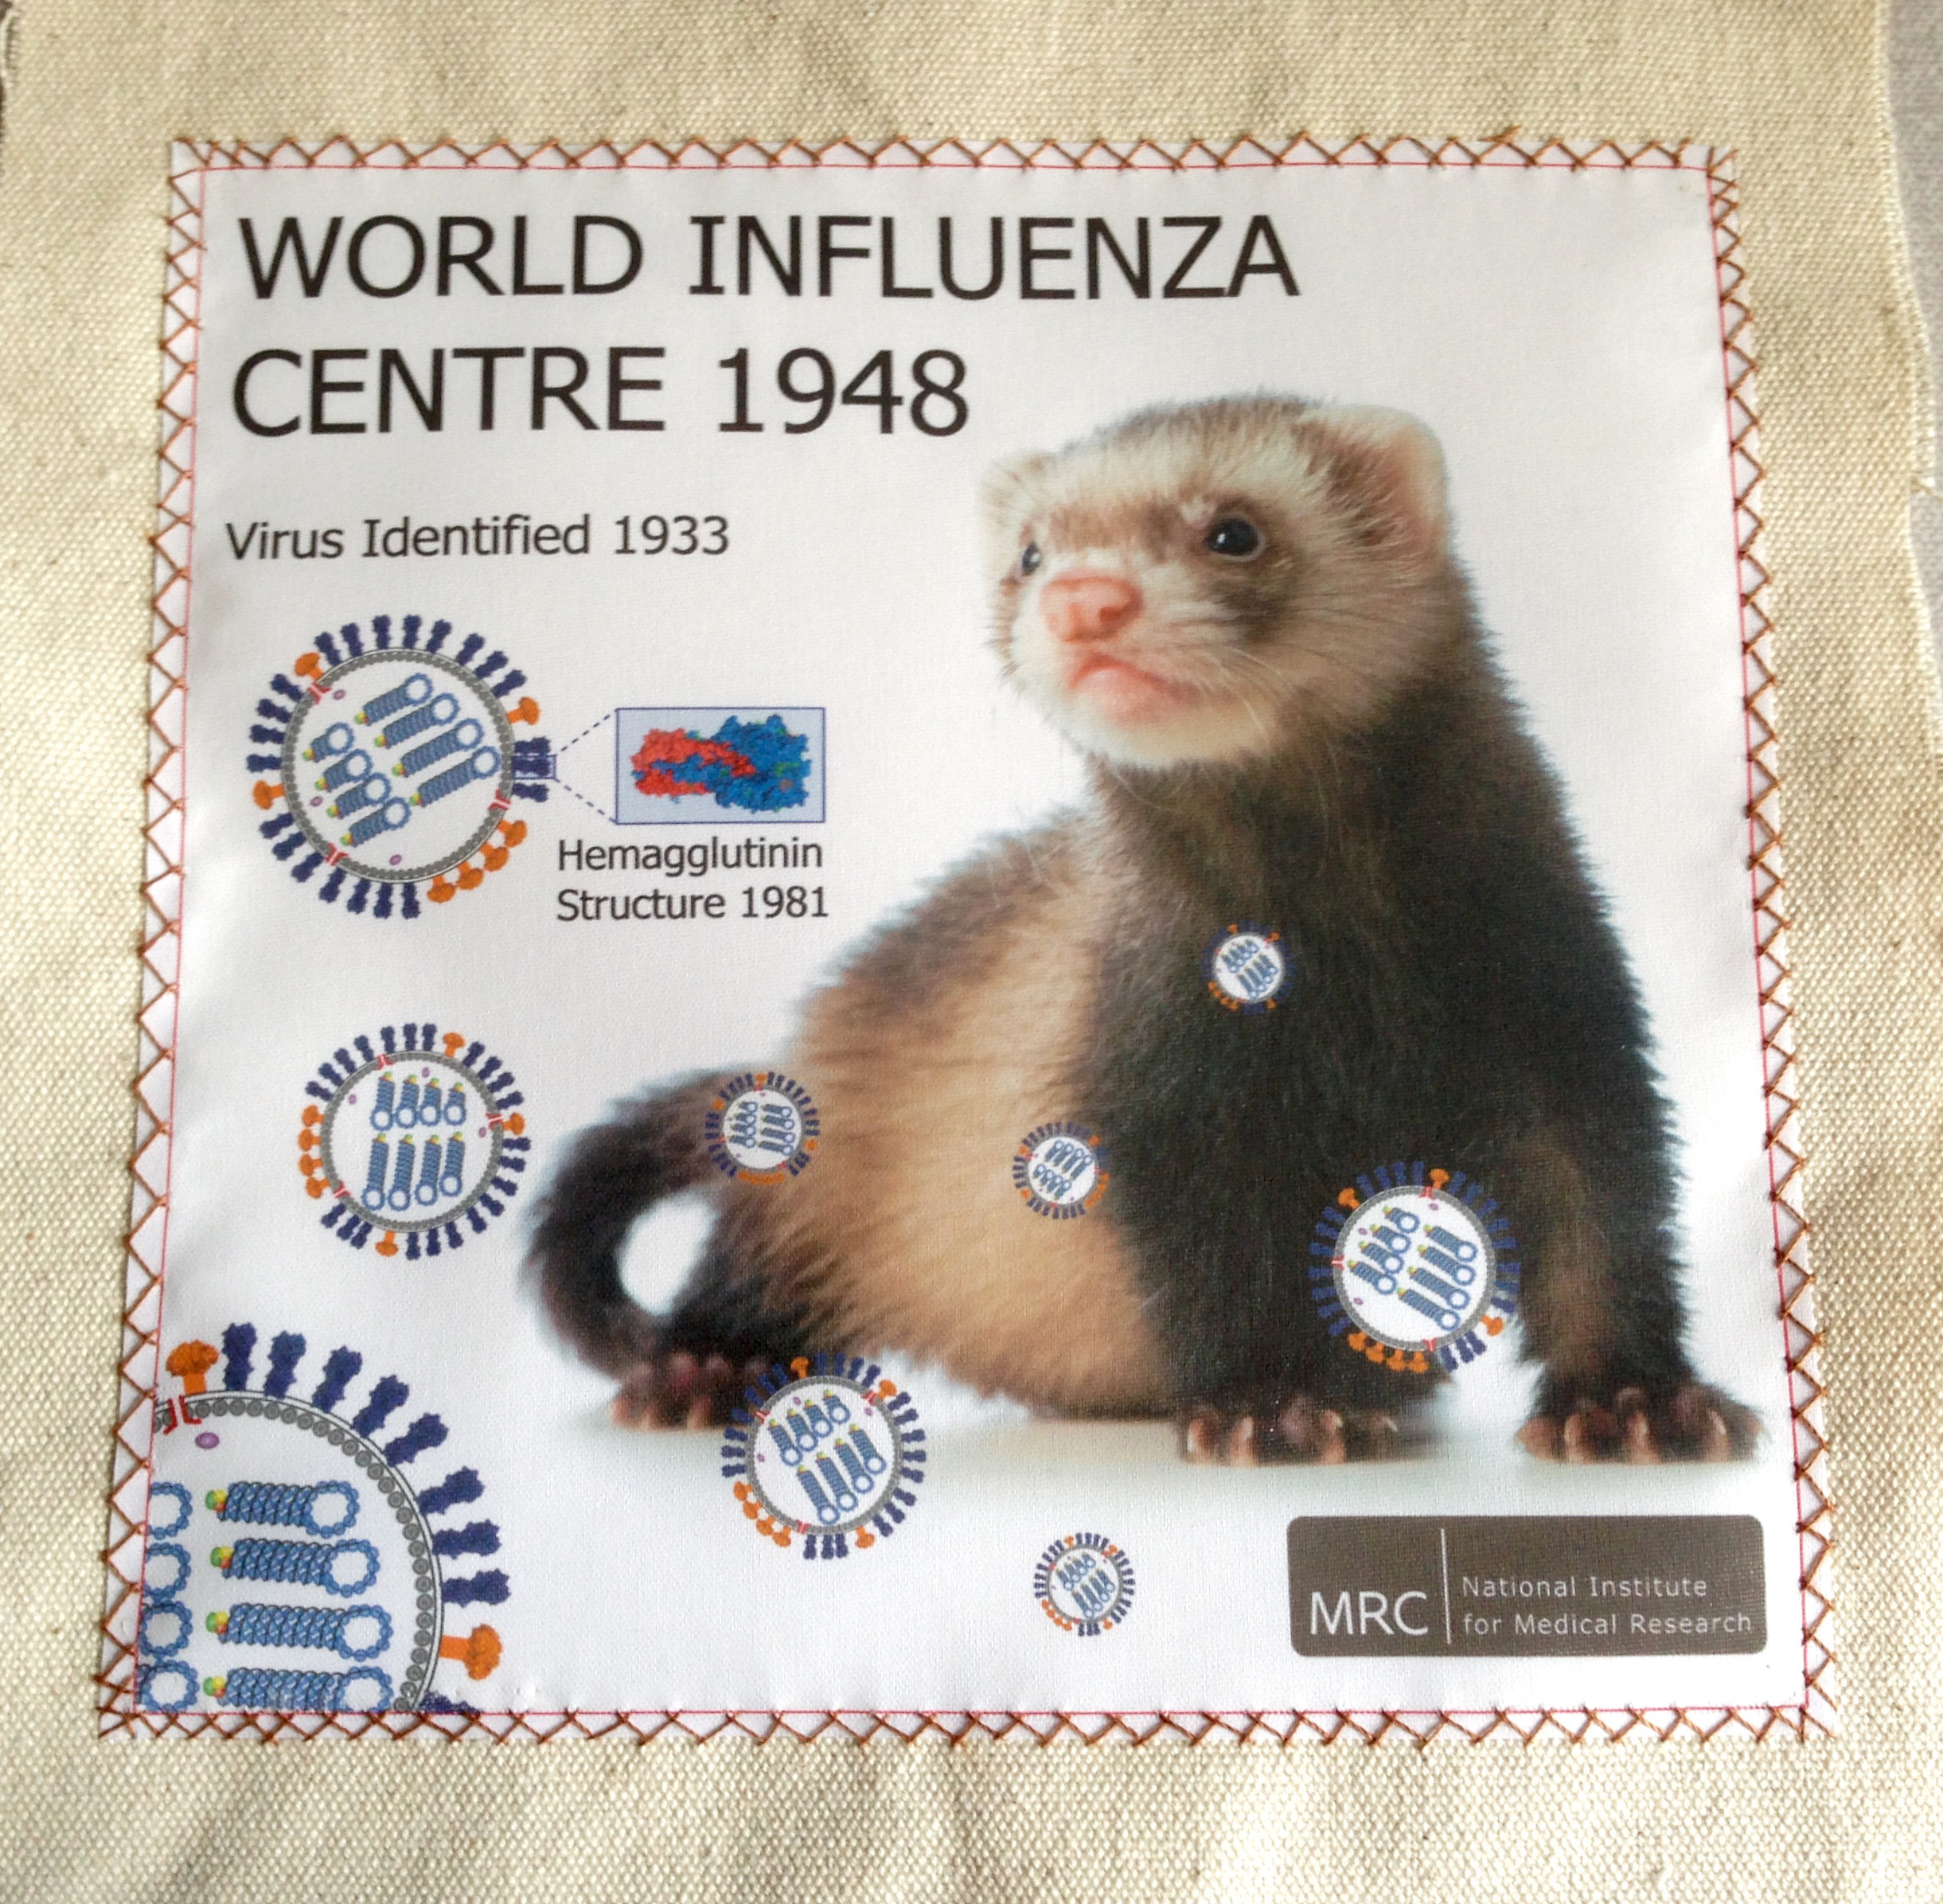 section of tapestry from the National Institute for Medical Research's World Influenza Centre commemorating the identification of the flu virus in 1933, with a photo of a ferret next to diagrams of the virus